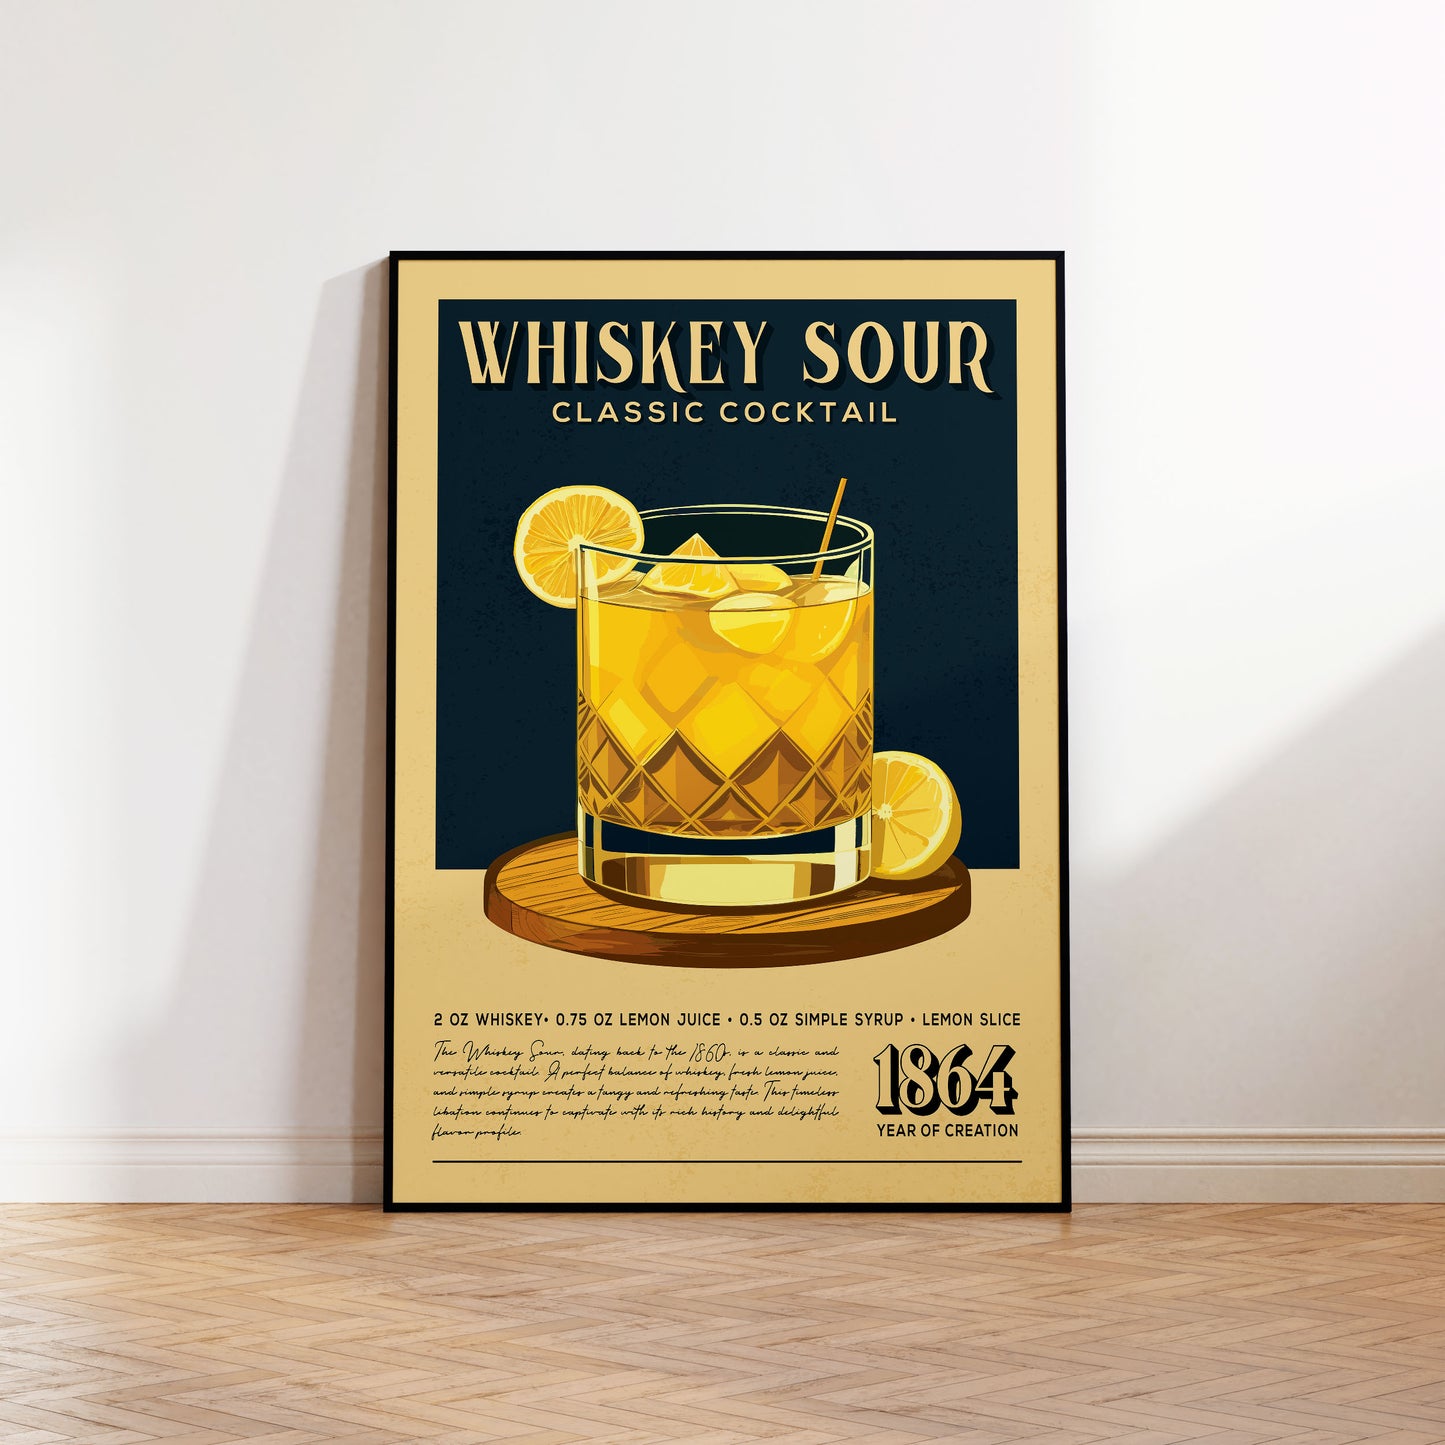 Whiskey Sour - Classic Cocktail Poster